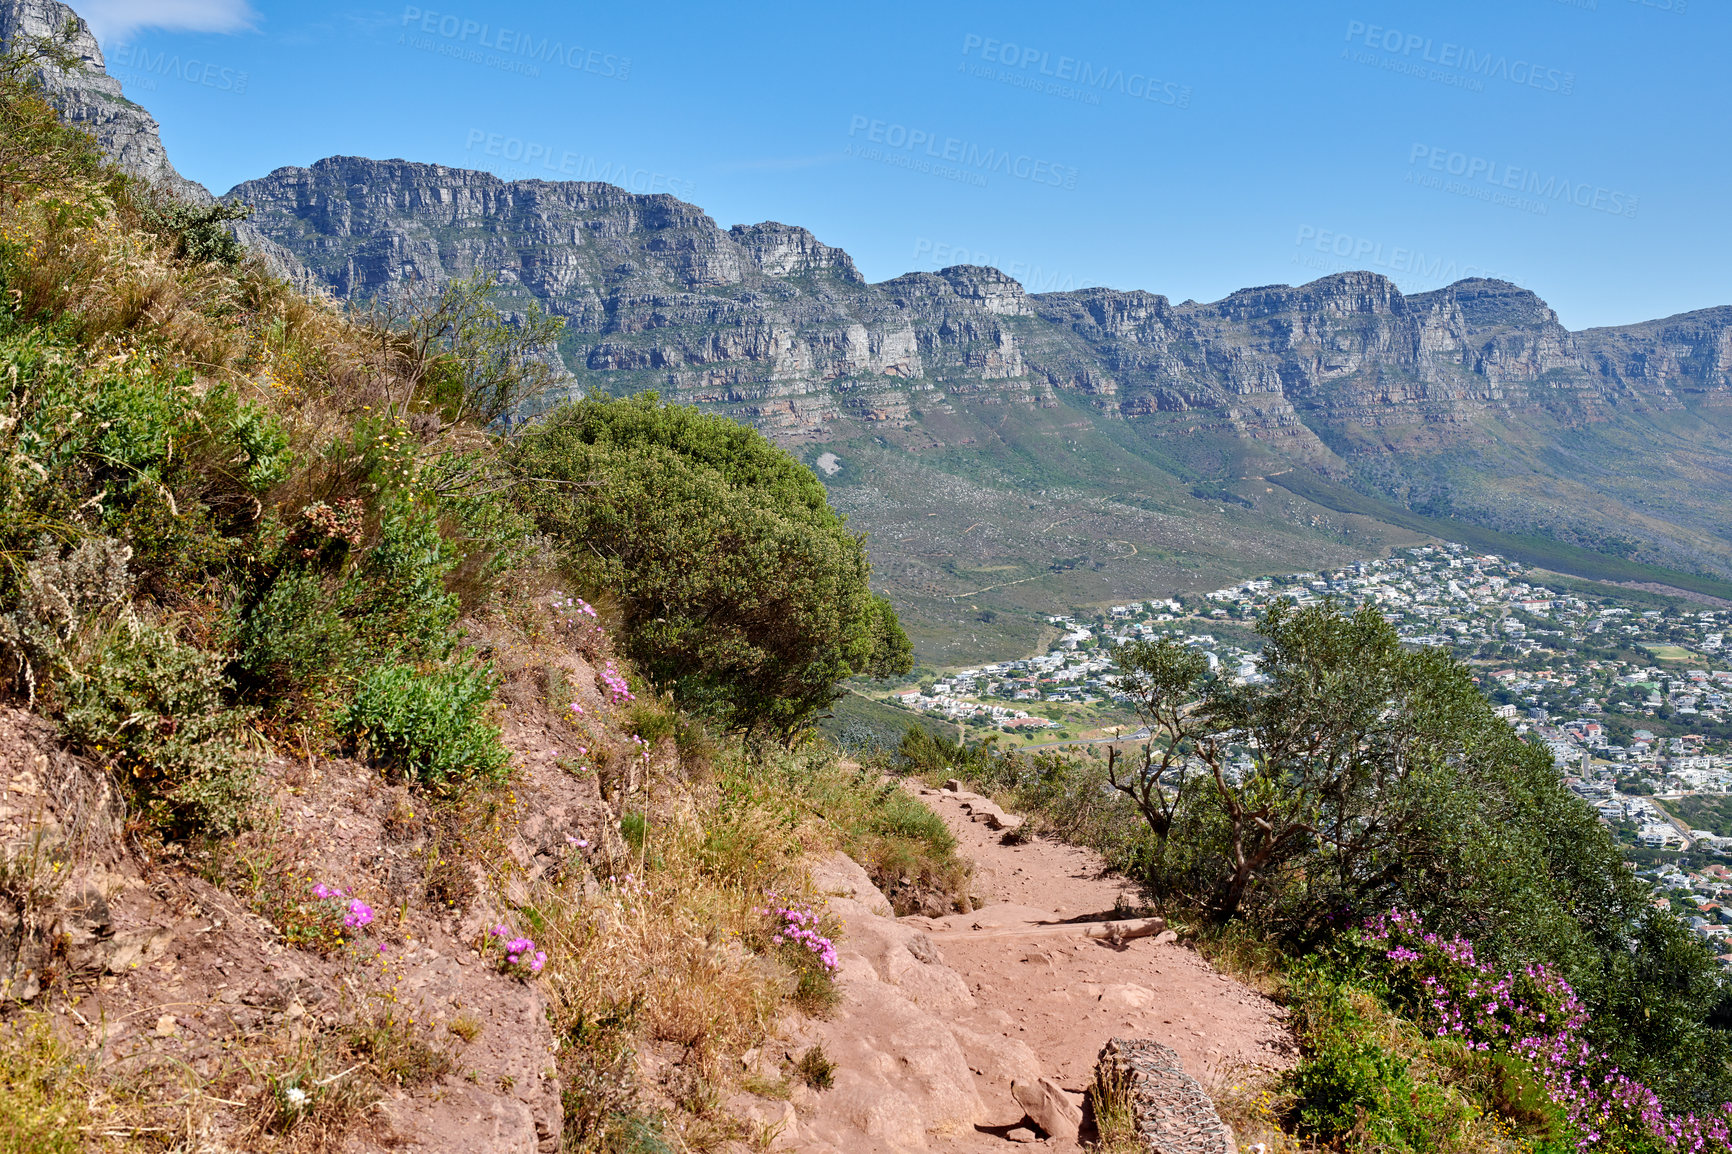 Buy stock photo Scenic views, plants and vegetation on a mountain trail on Lion's Head, Table Mountain in Cape Town, South Africa. Beautiful landscape scenery of greenery and plants next to a walking path in nature